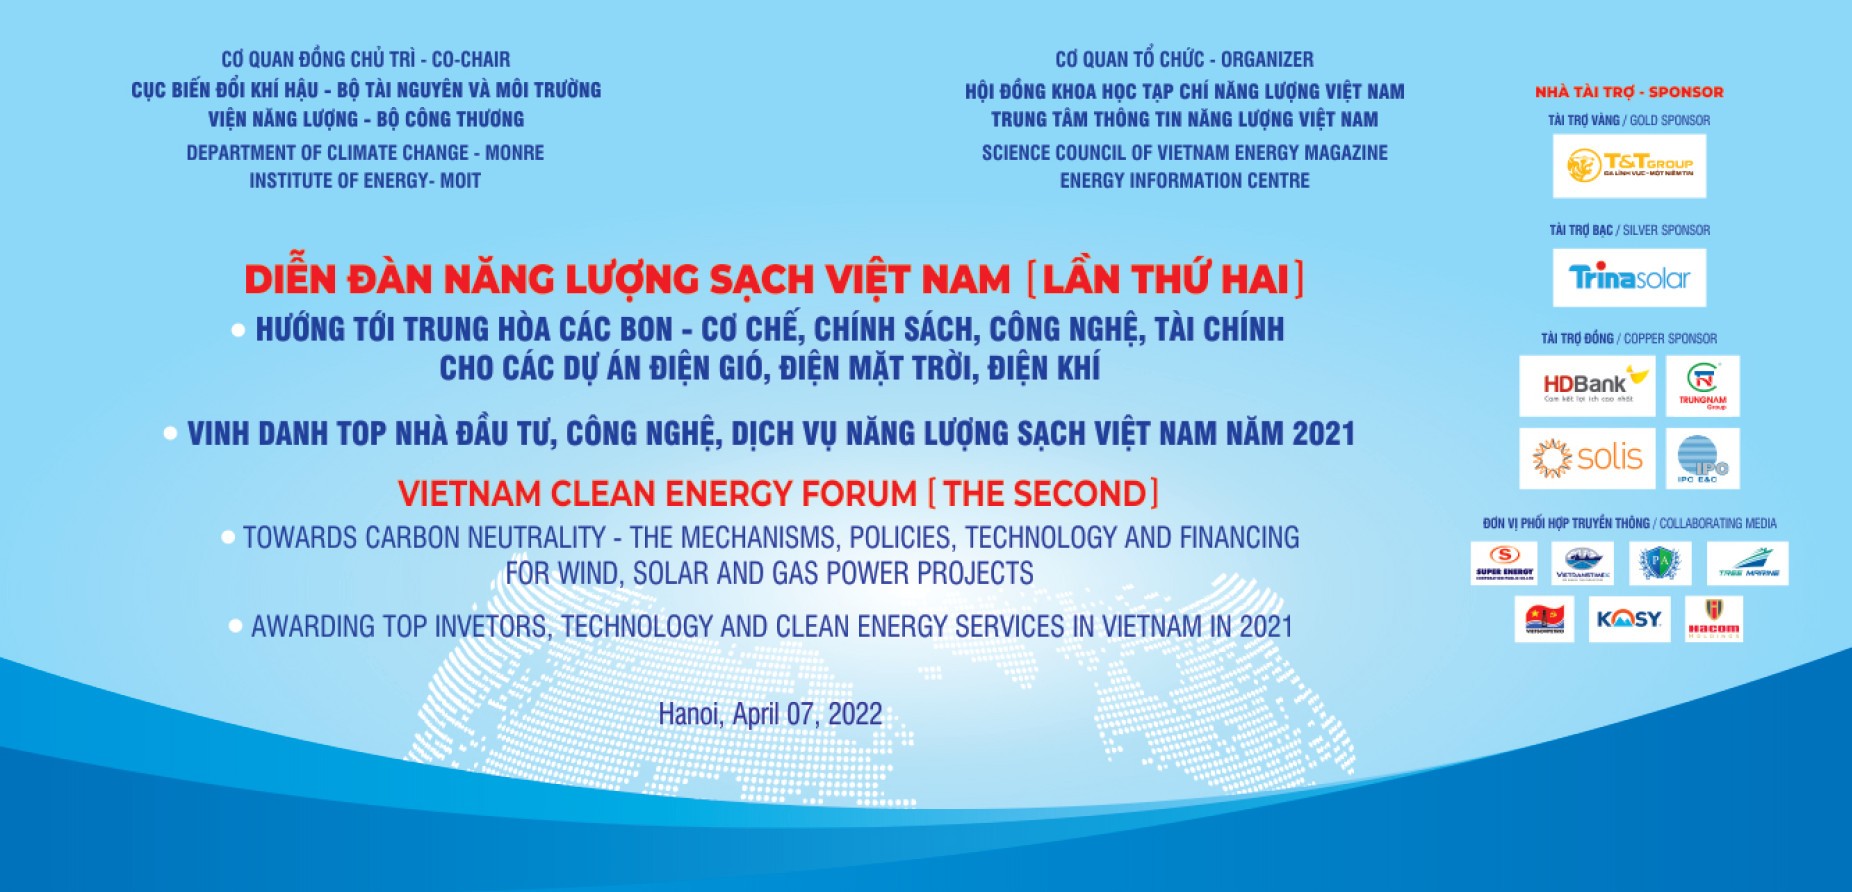 Upcoming event- The Second Vietnam Clean Energy Forum